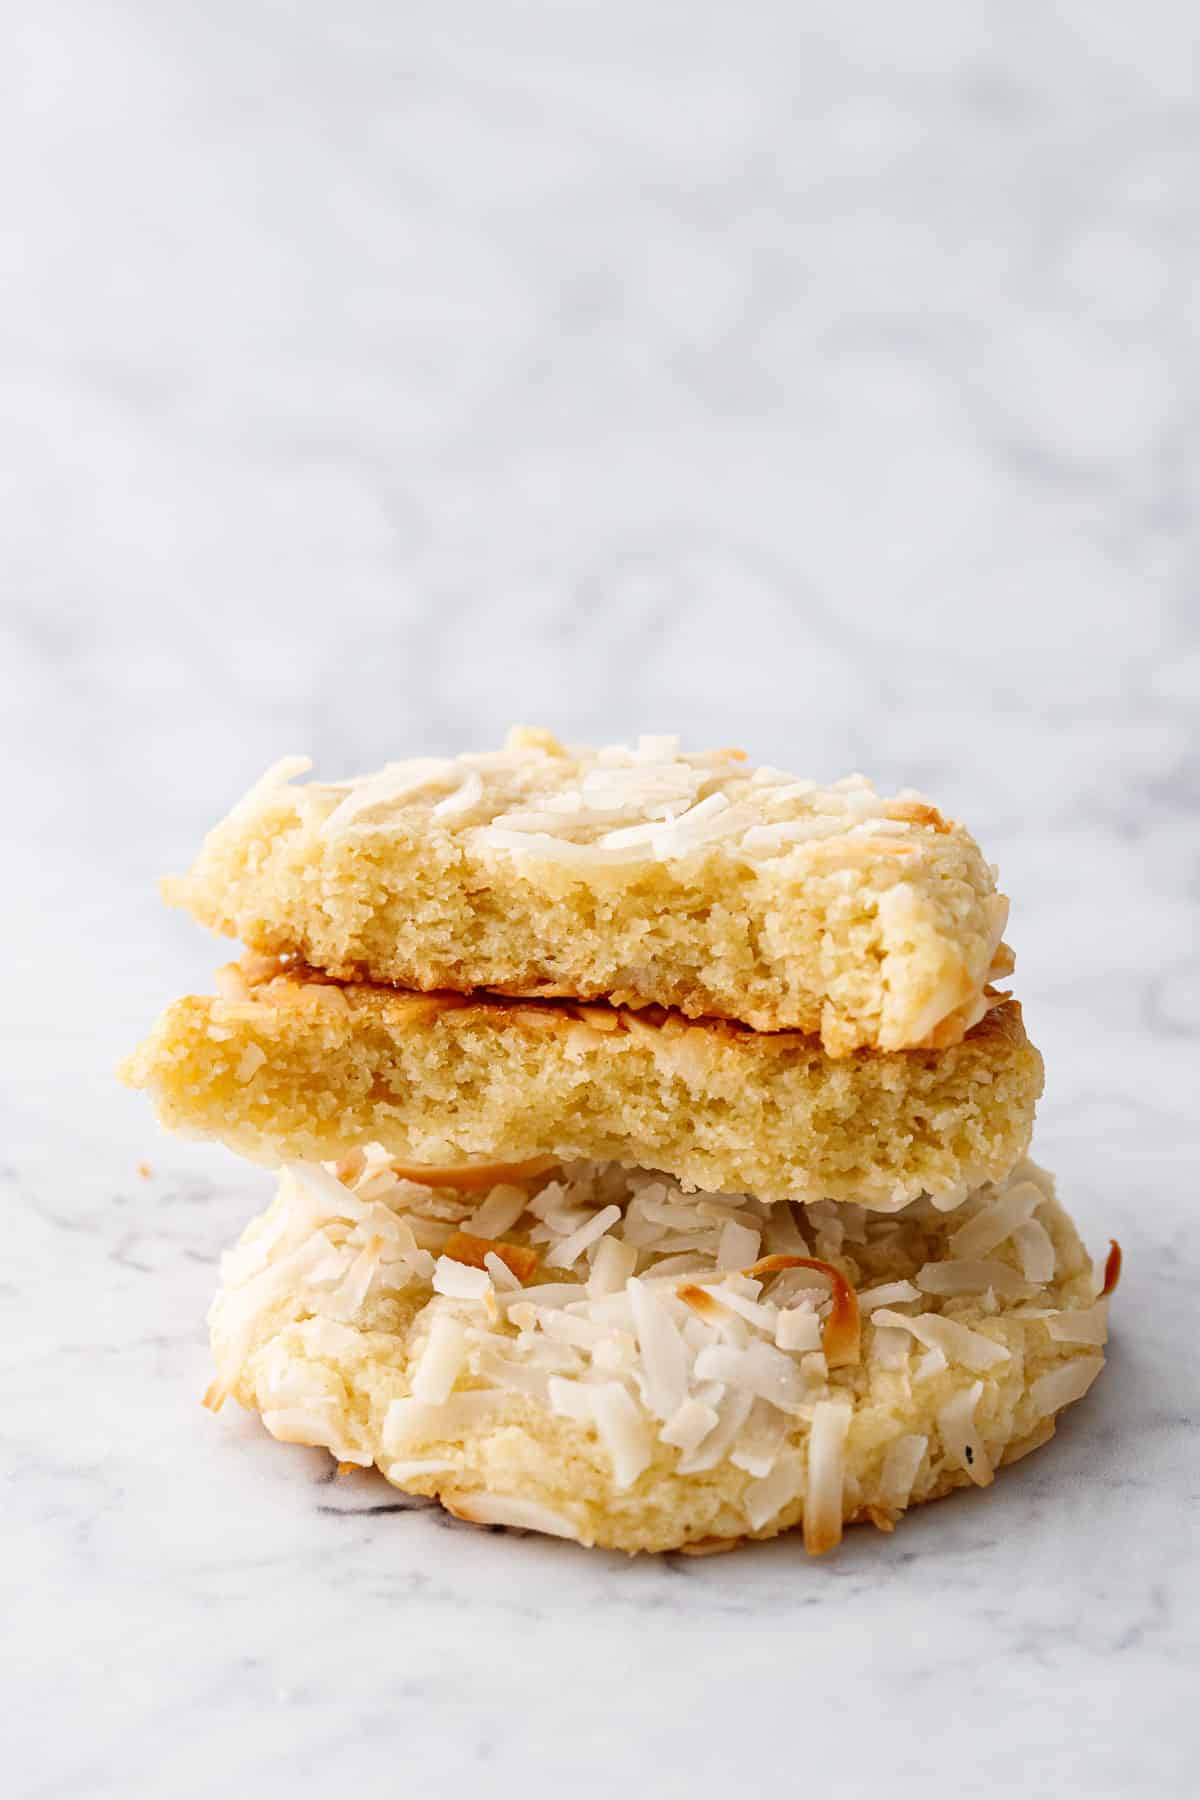 Stacked Toasted Coconut Sugar Cookies, one cookie broken in half to show the soft and chewy interior texture.